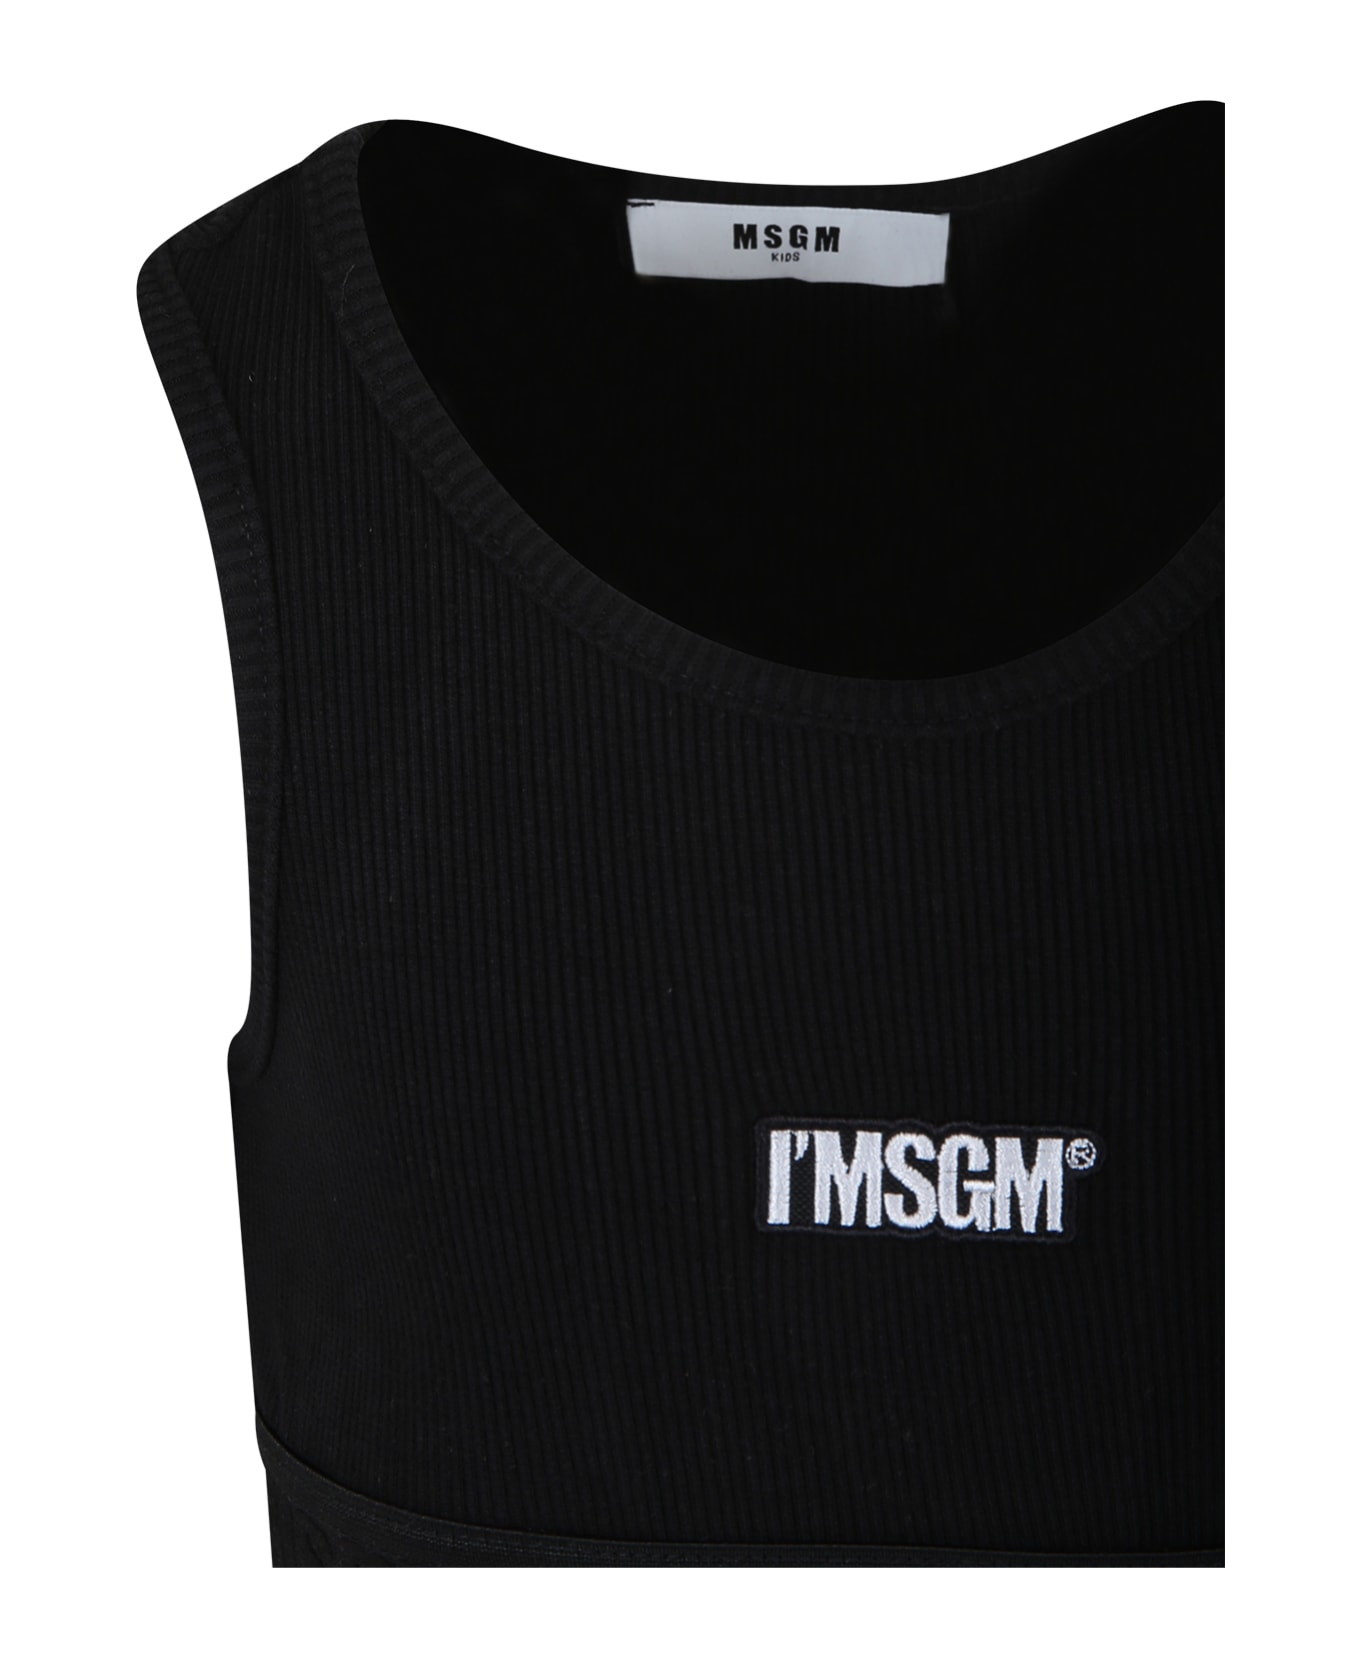 MSGM Black Crop Top For Girl With Logo - Black トップス